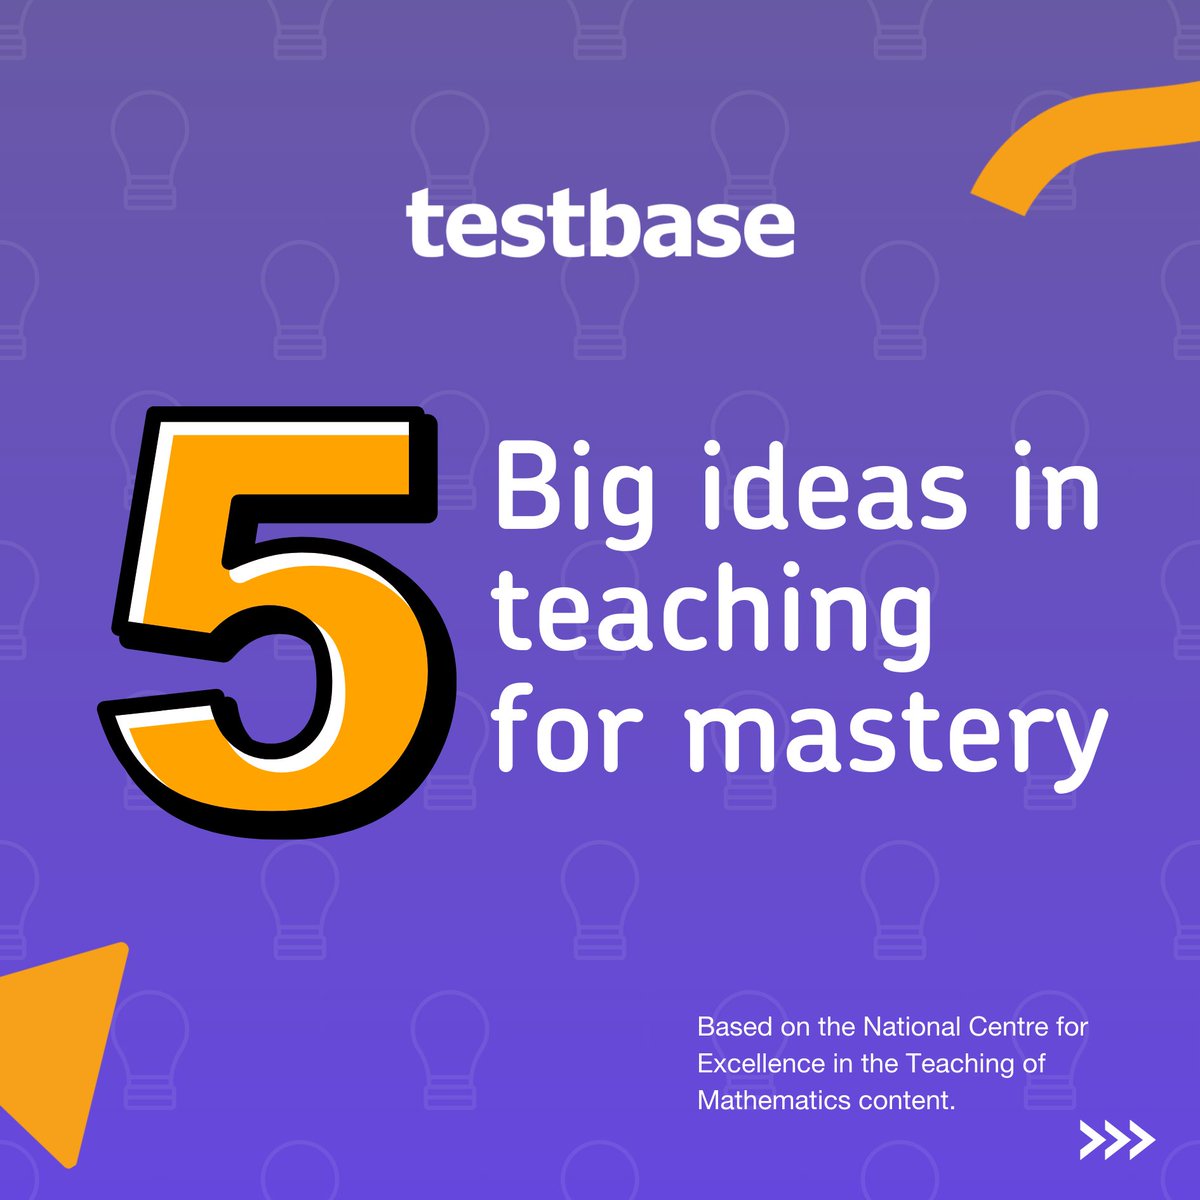 😍 Teacher, have you ever heard of the 5 big ideas in teaching for mastery?  

Follow the thread to understand more about this powerful methodology and get the most out of your pupils. #edutwitter #twitteredu